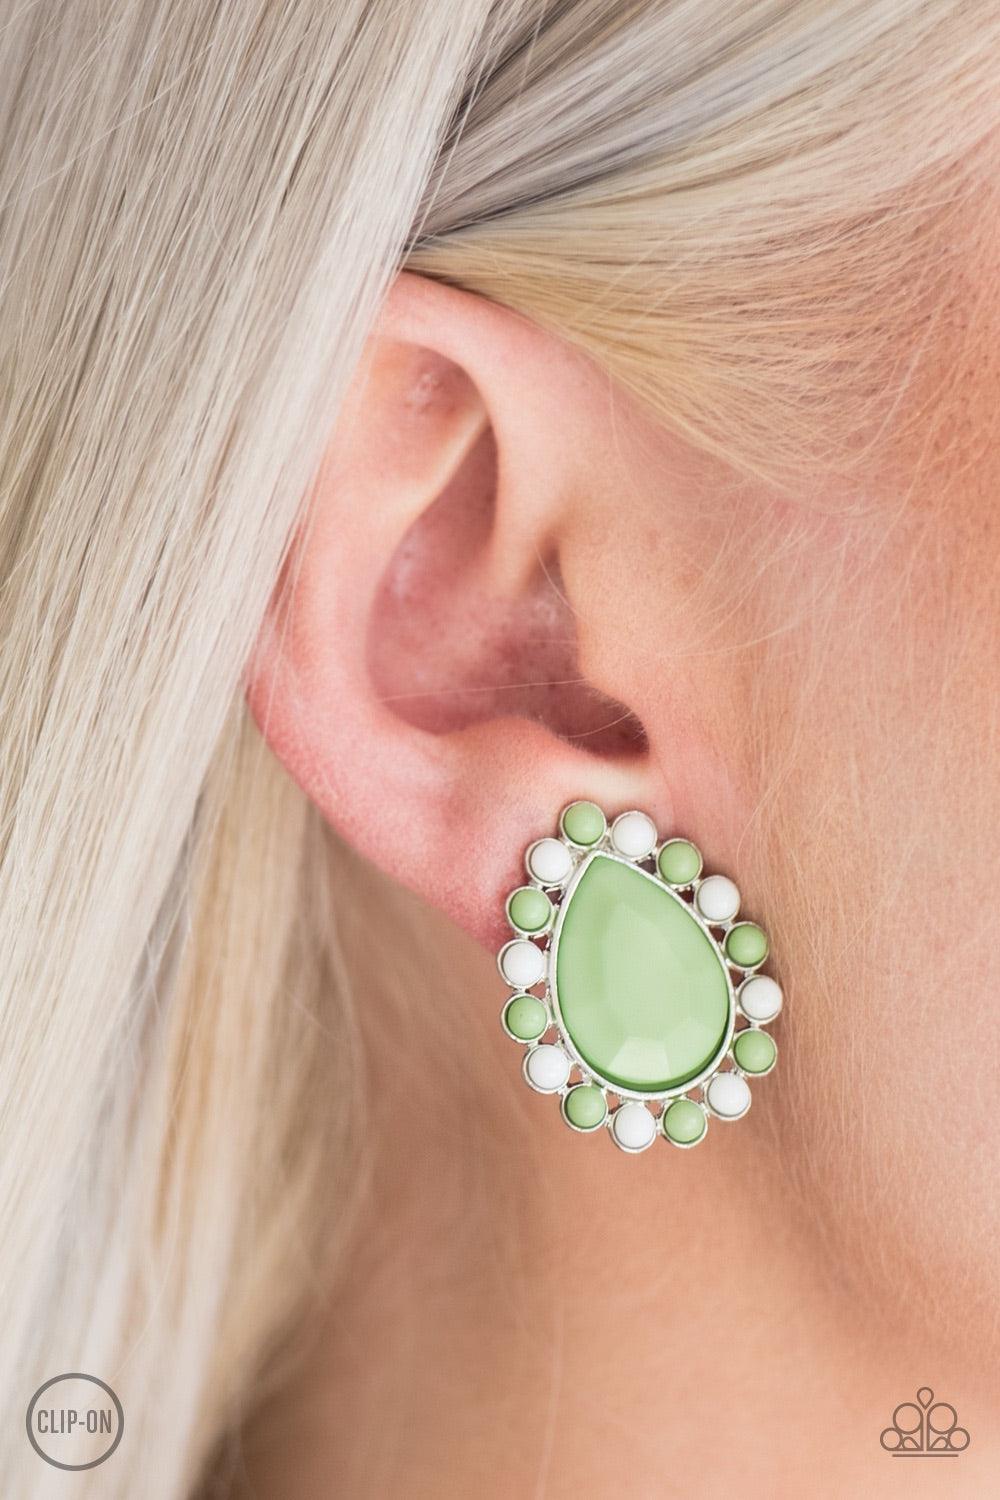 Paparazzi Accessories So Spring Season - Green *Clip-On Dainty white and green beads spin around a faceted green teardrop, creating a colorful frame. Earring attaches to a standard clip-on fitting. Jewelry